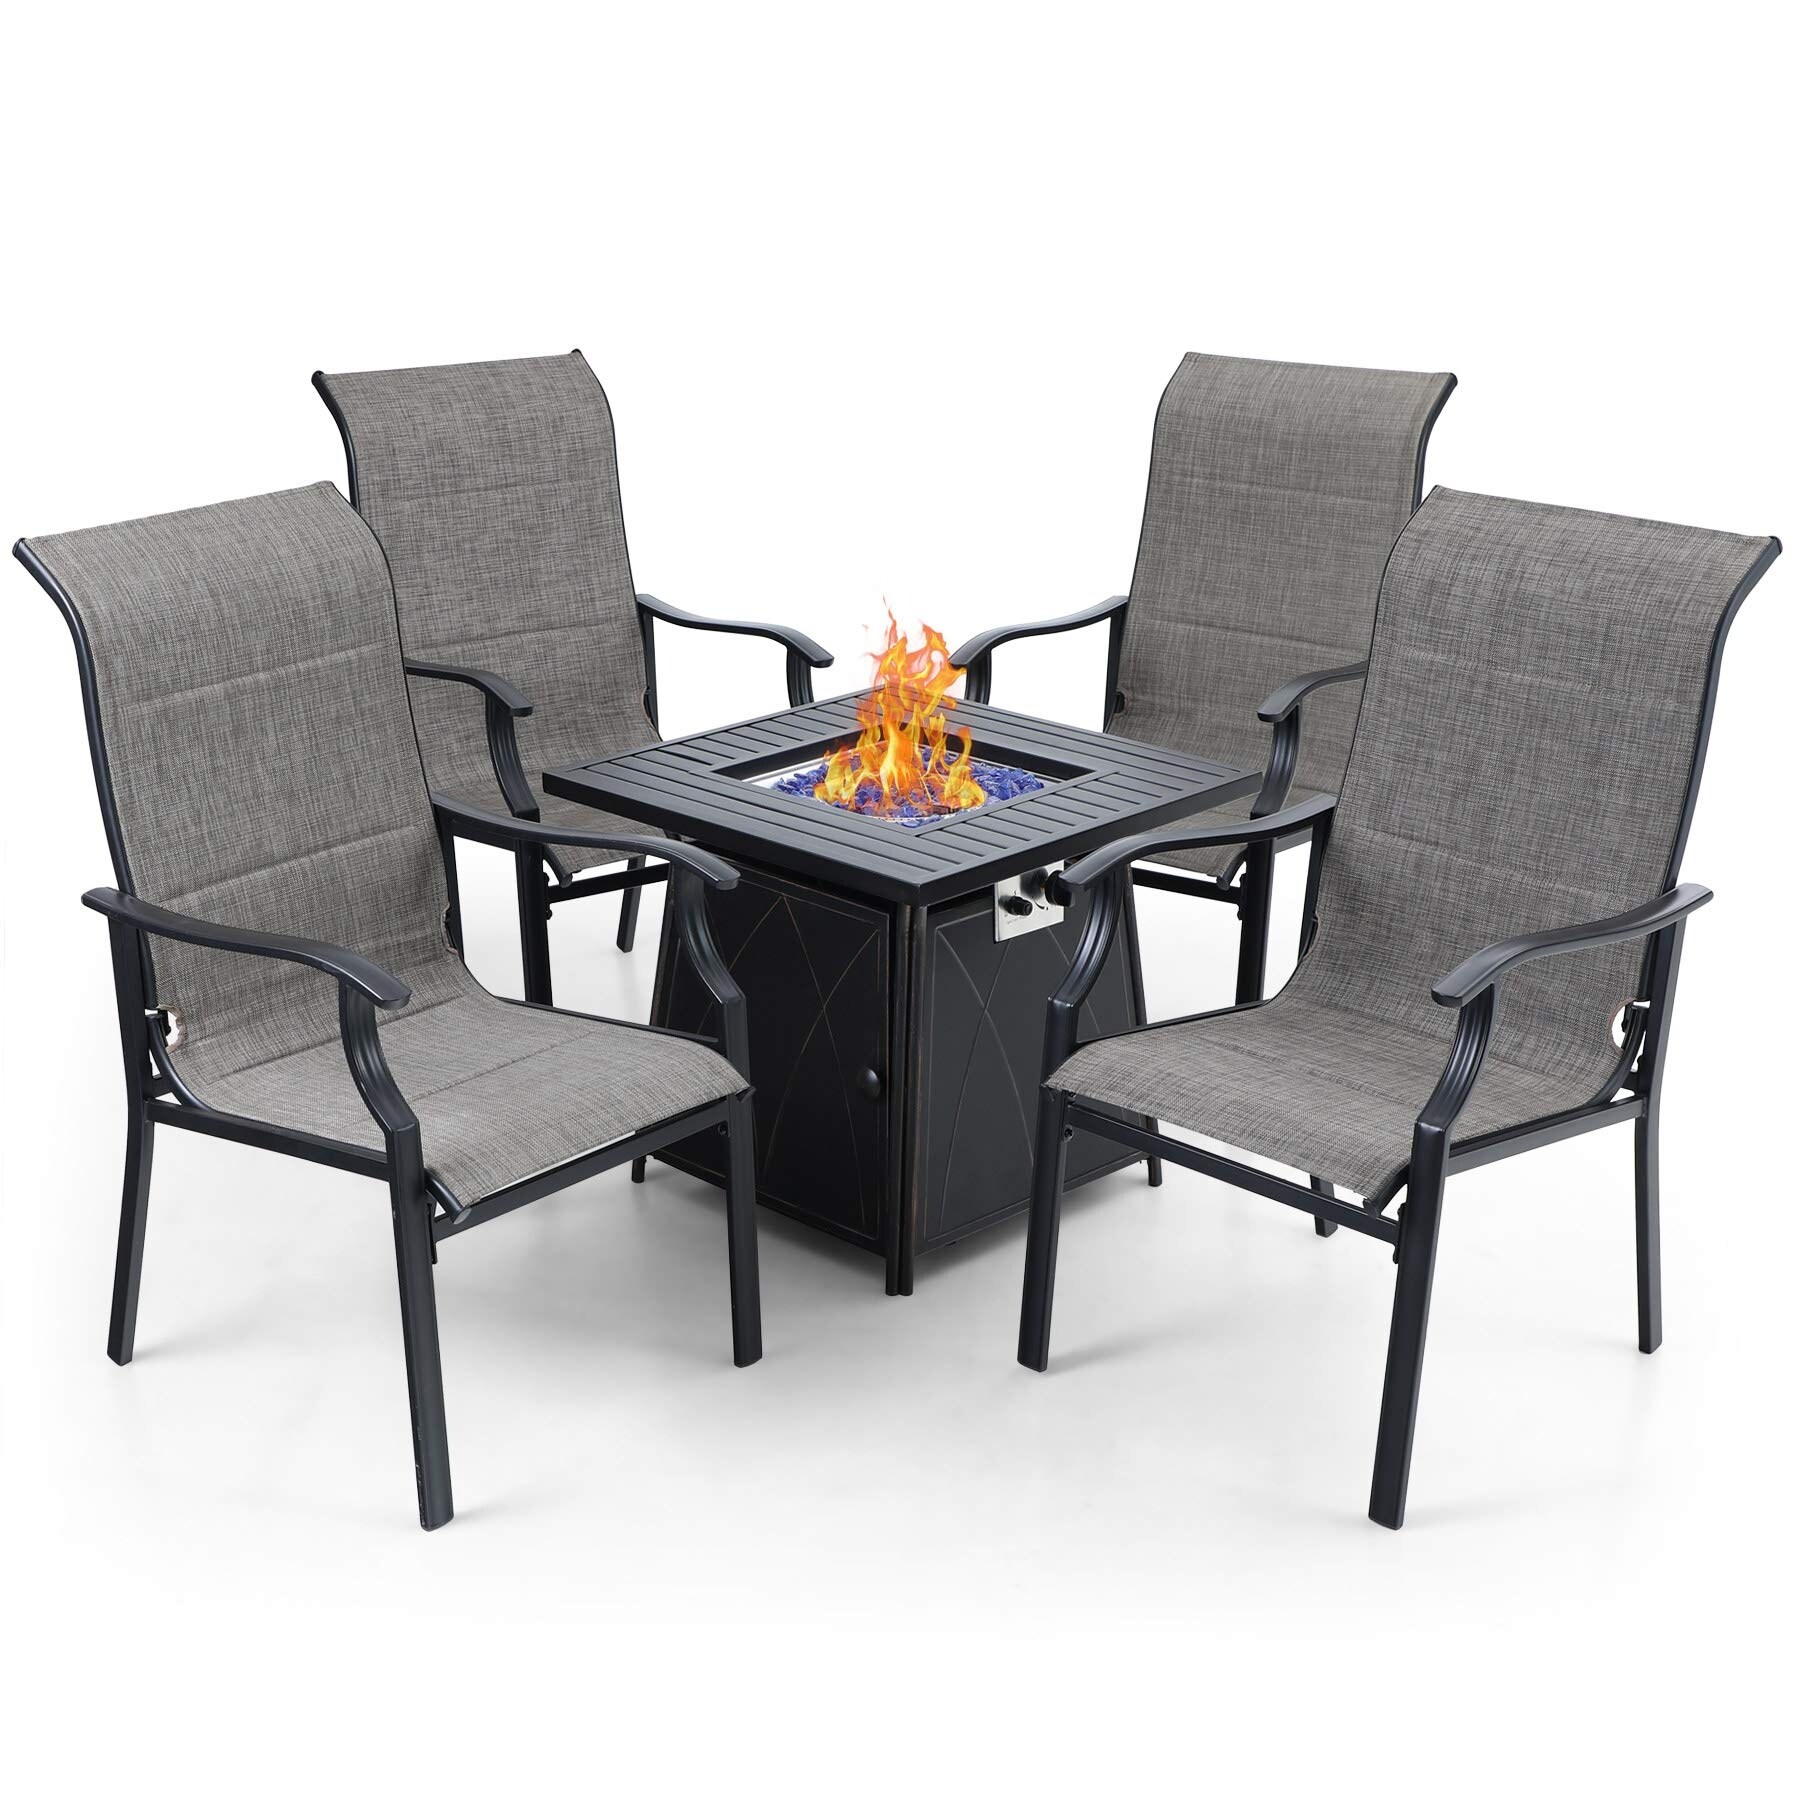 Mfstudio 5-piece Outdoor Fire Pit Set  28 Inch Square Propane Gas Fire Pit Table With 4 Padded Textilene Fabric Chairs